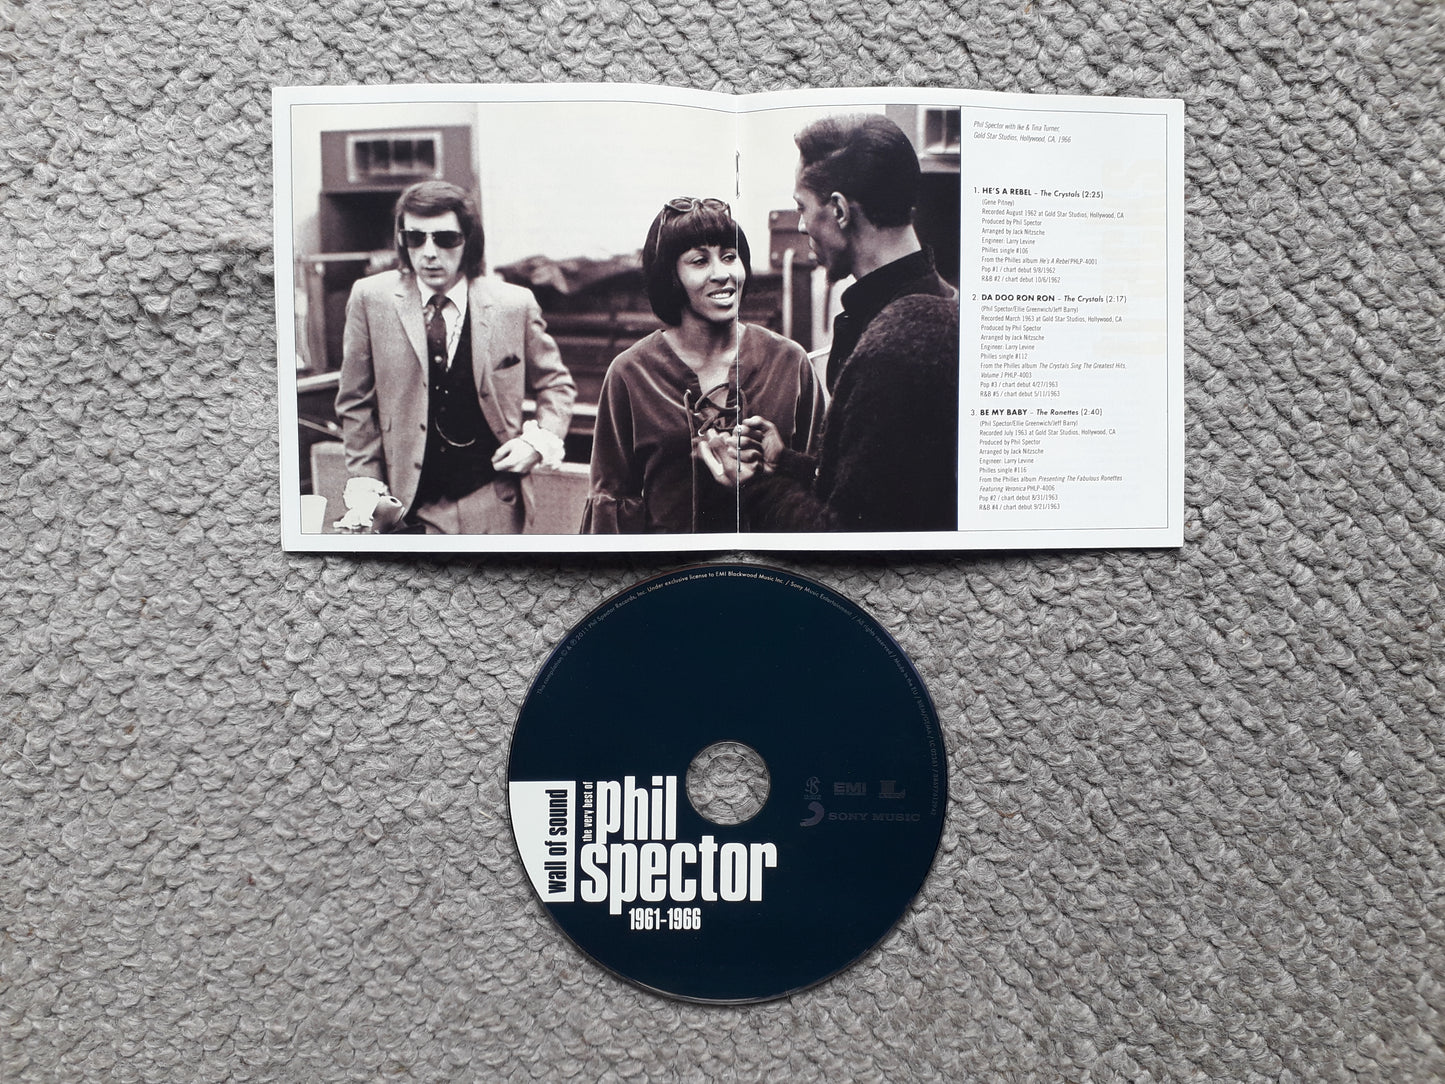 Phil Spector-Wall Of Sound-The Very Best Of 1961-1966 CD